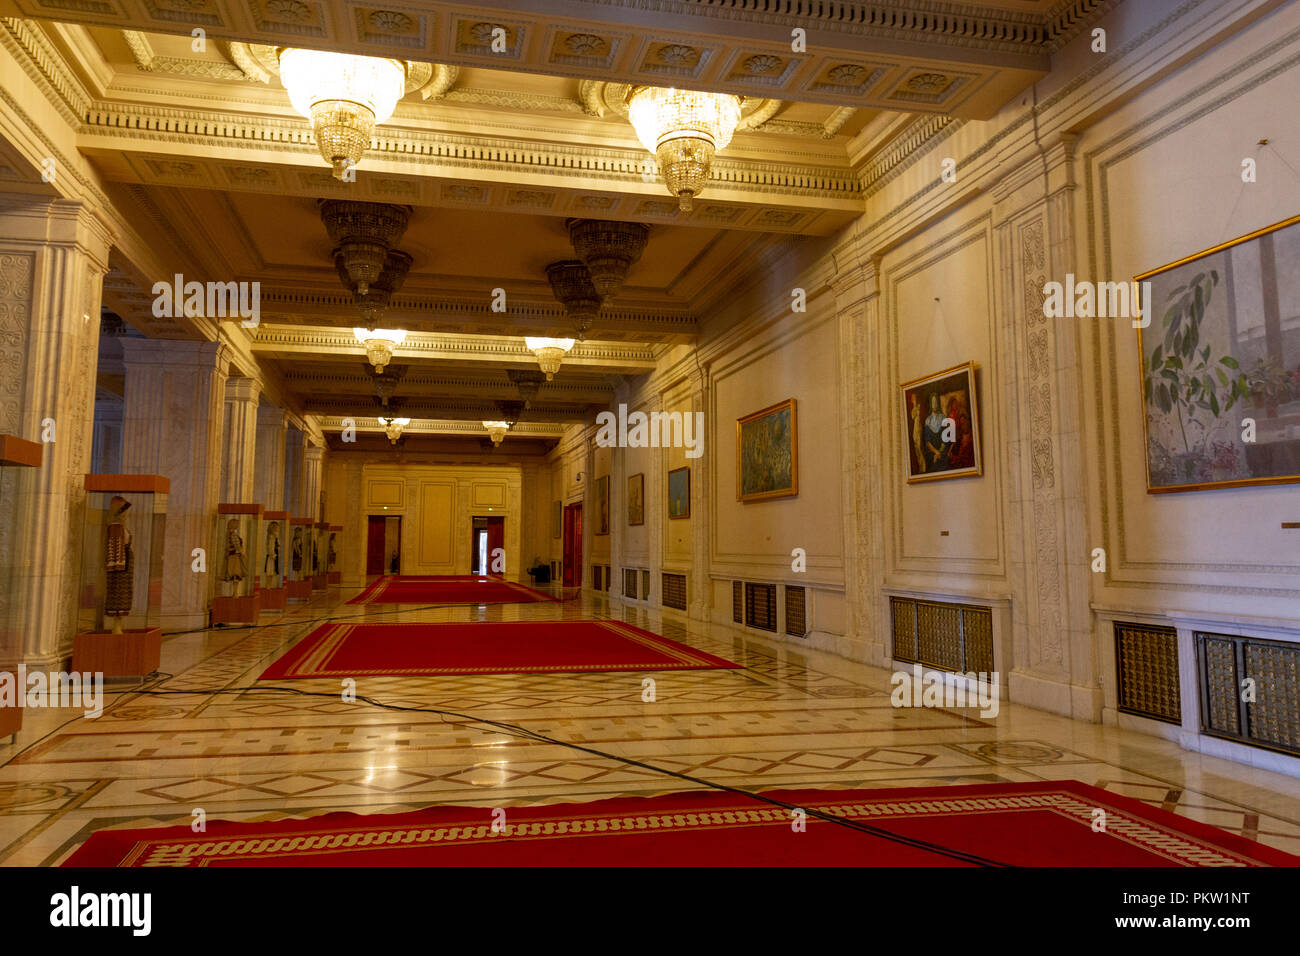 Ornate corridor inside the Palace of the Parliament, House of the Republic, Bucharest, Romania. Stock Photo